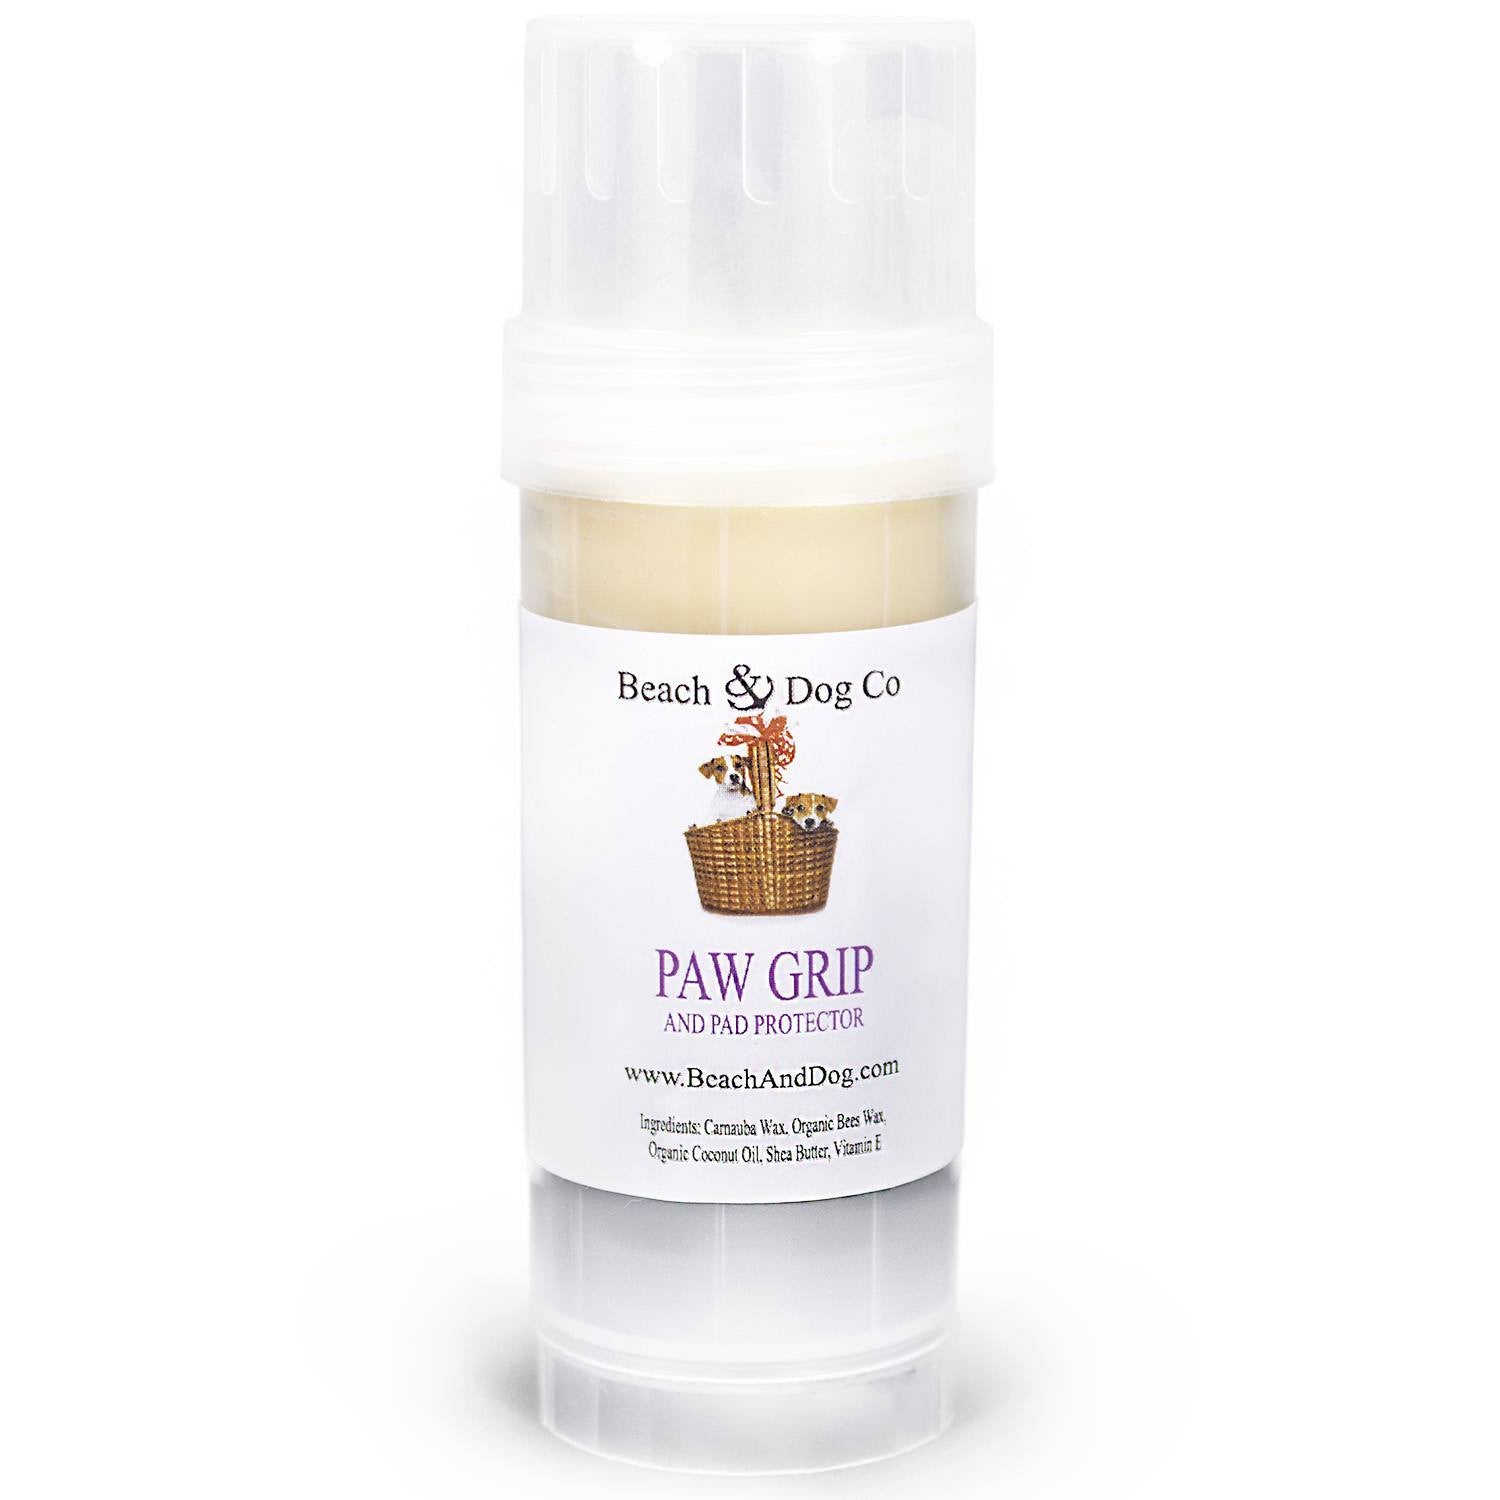 Paw Grip (2 oz Twist Up) All Natural and Organic Formula